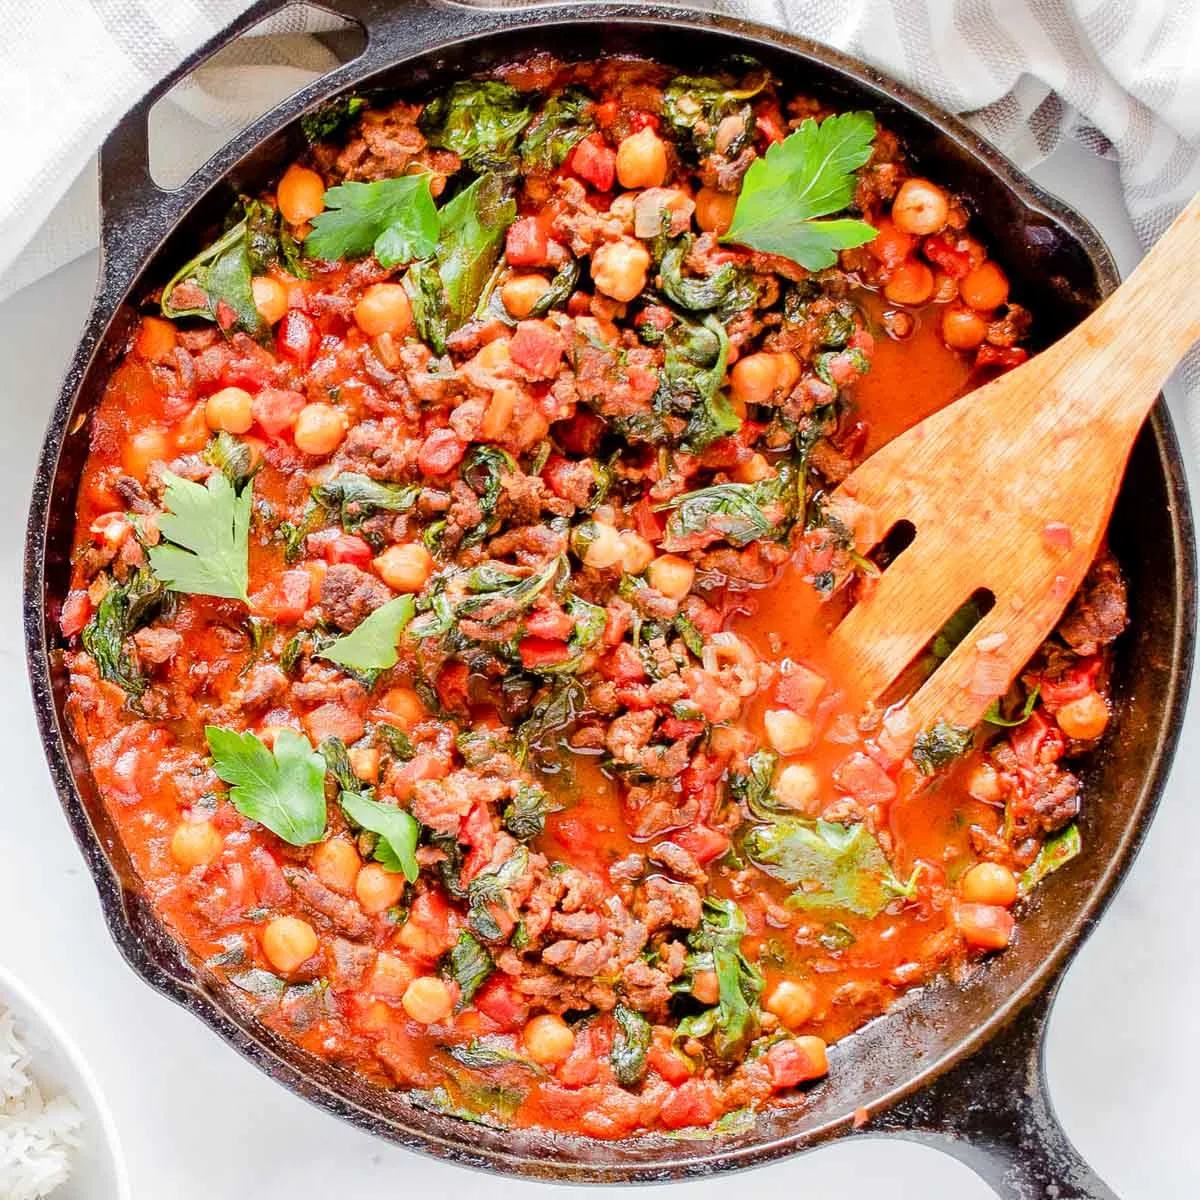 Chickpea chorizo stew in a skillet.